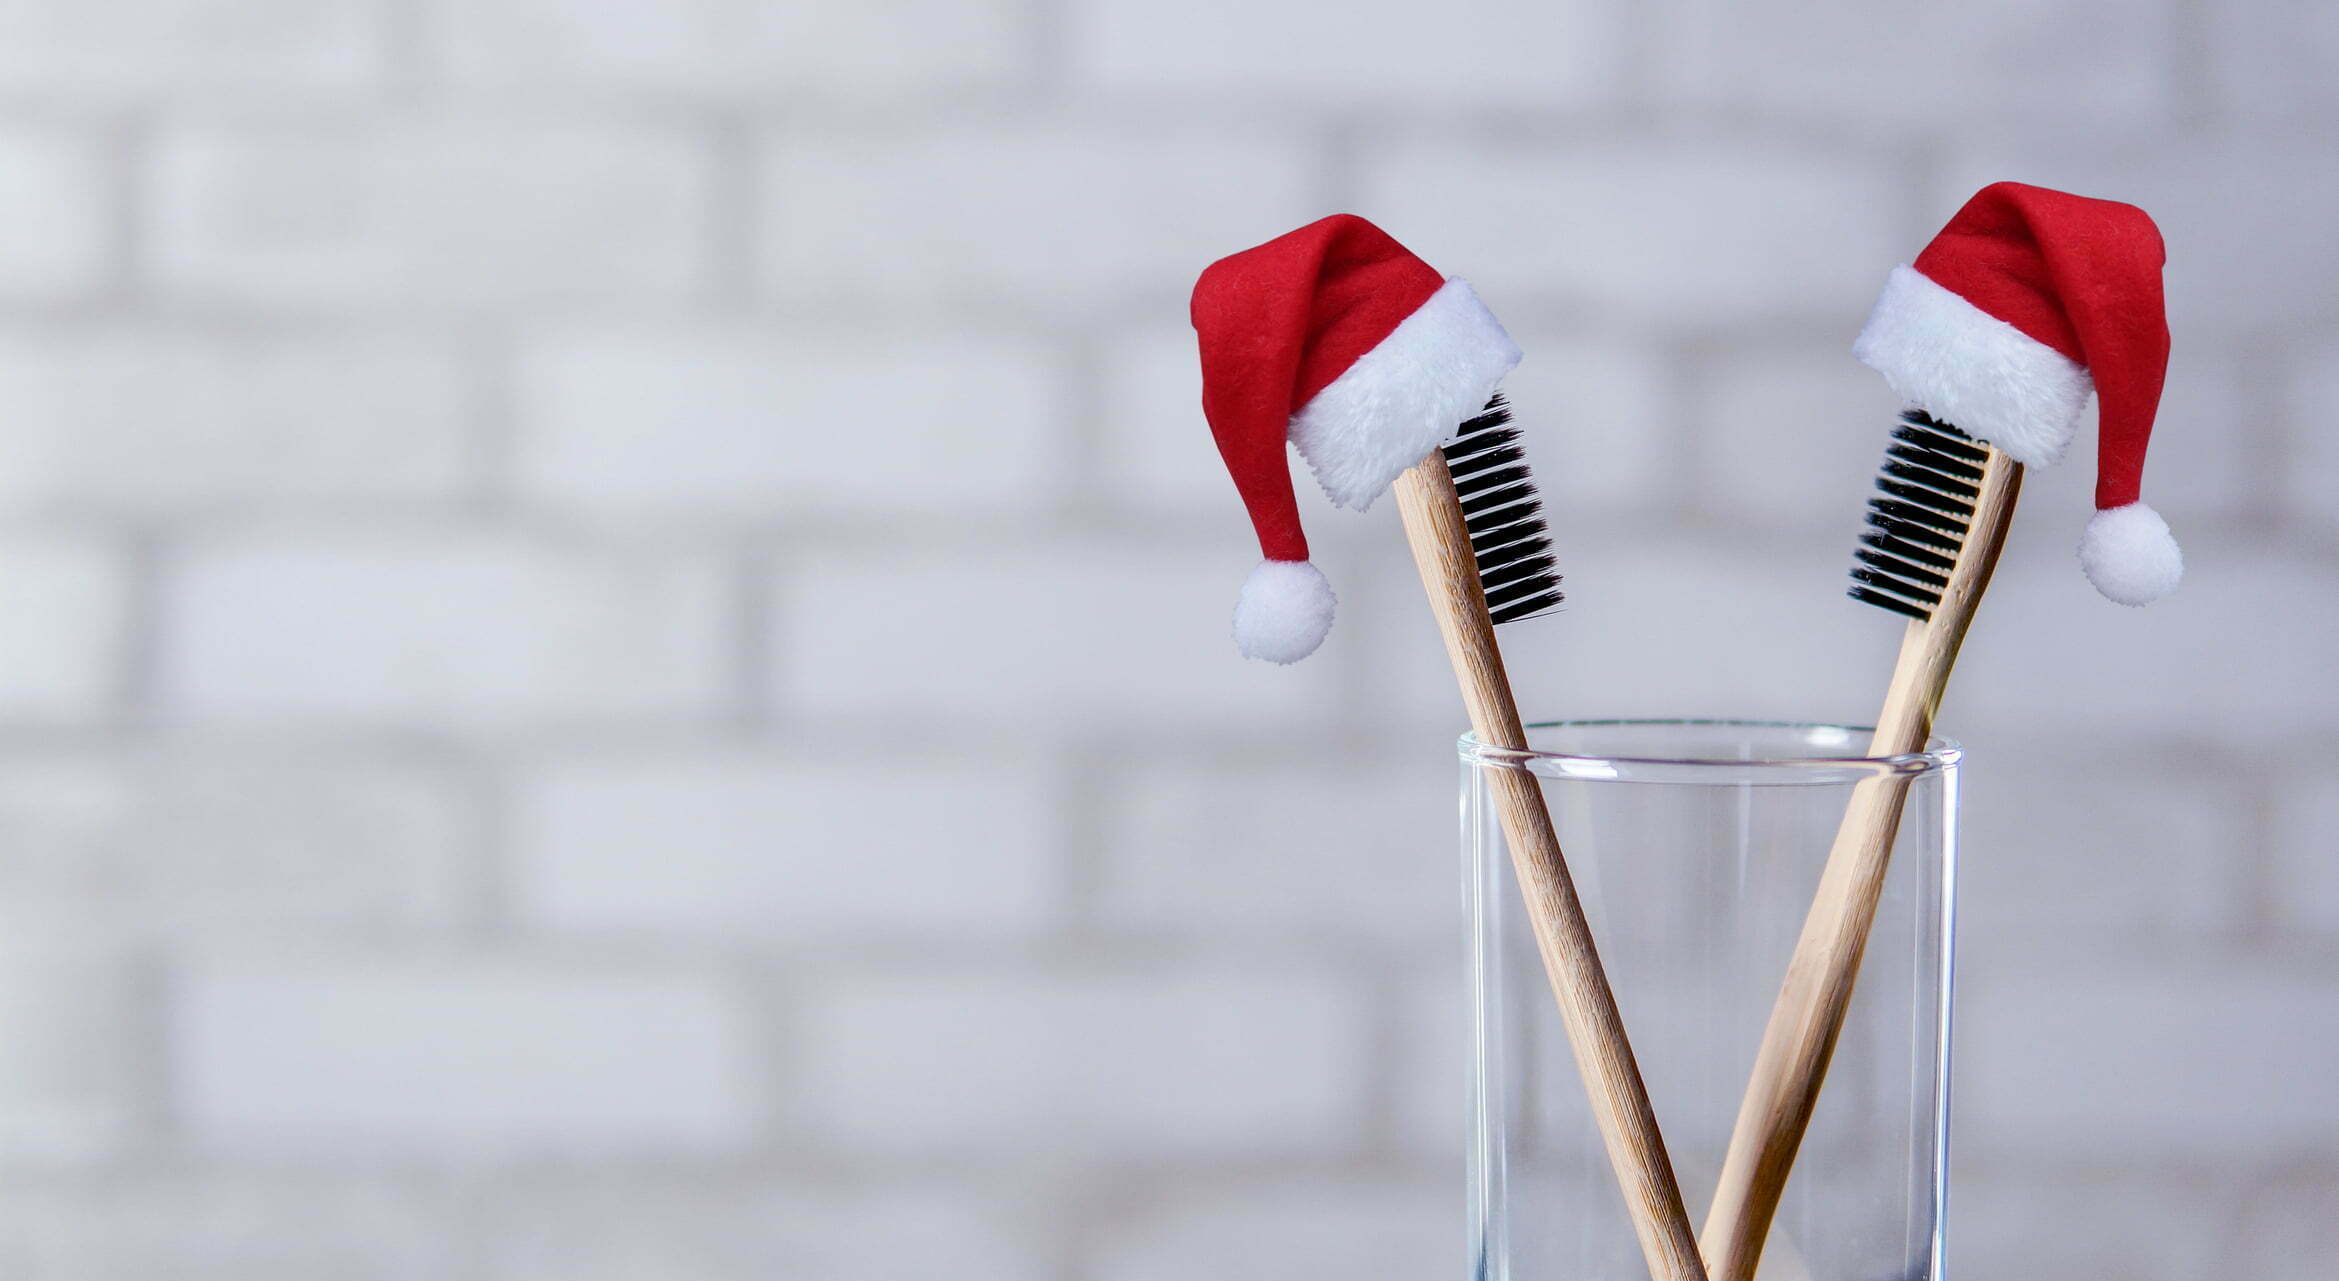 Two toothbrushes in the glass wearing santa hats